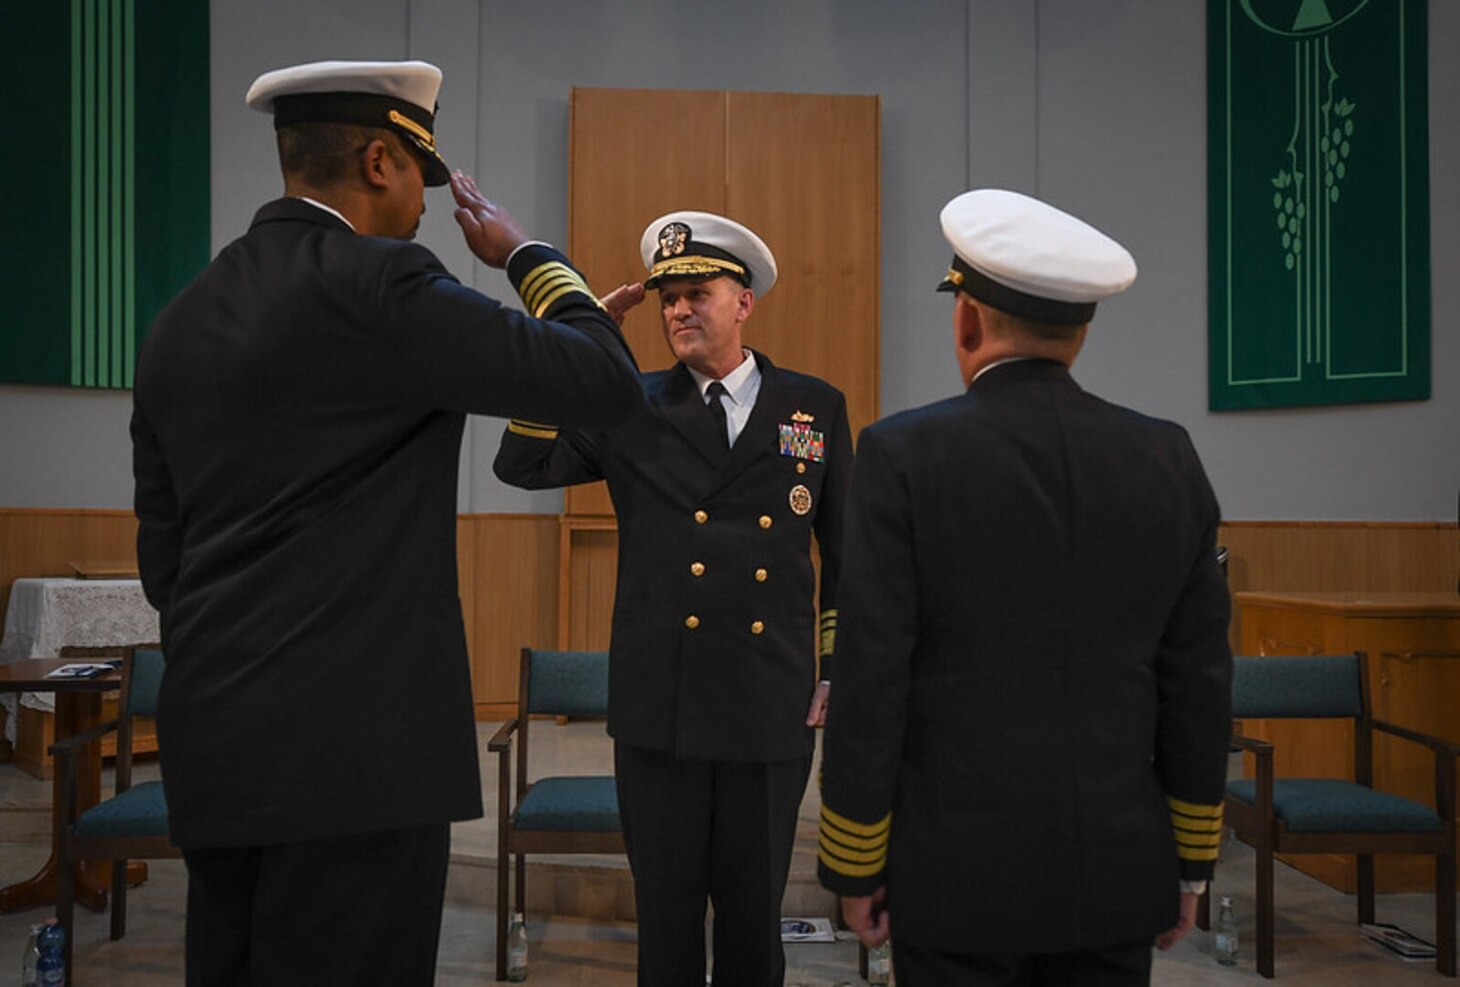 Capt. Kenneth S. Pickard, right, relieves Capt. Frank E. Okata, left, as Commodore, Commander, Task Force 63, during a change of command ceremony held at Naval Support Activity Naples, Italy, Jan. 21, 2022. U.S. Naval Forces Europe and Africa, headquartered in Naples, Italy, conducts the full spectrum of joint and naval operations, often in concert with allied and interagency partners, in order to advance U.S. national interests, security and stability in Europe and Africa.